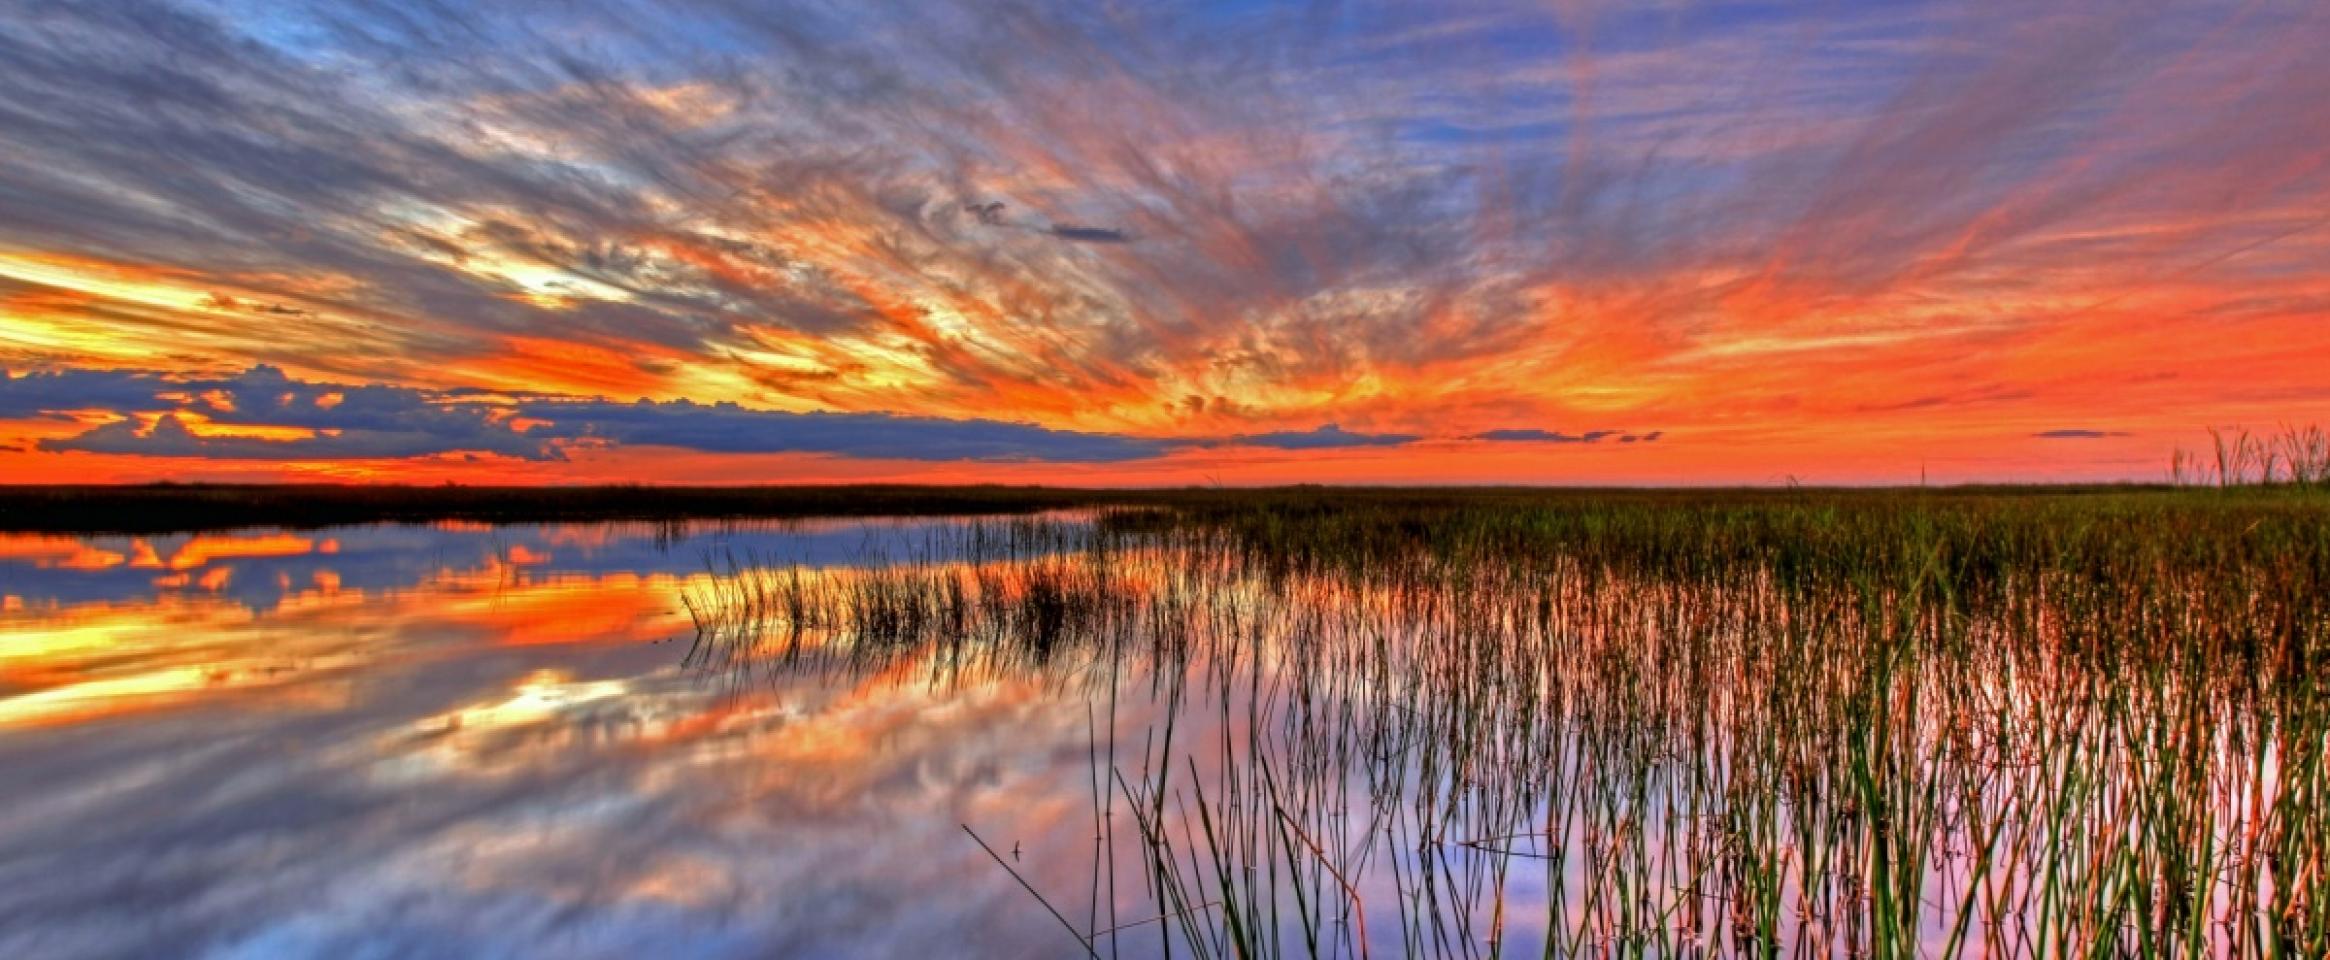 A dazzling sunset with lights and clouds shining over a wide grassy wetland in the Everglades. (Credit: G. Gardner/National Park Service)